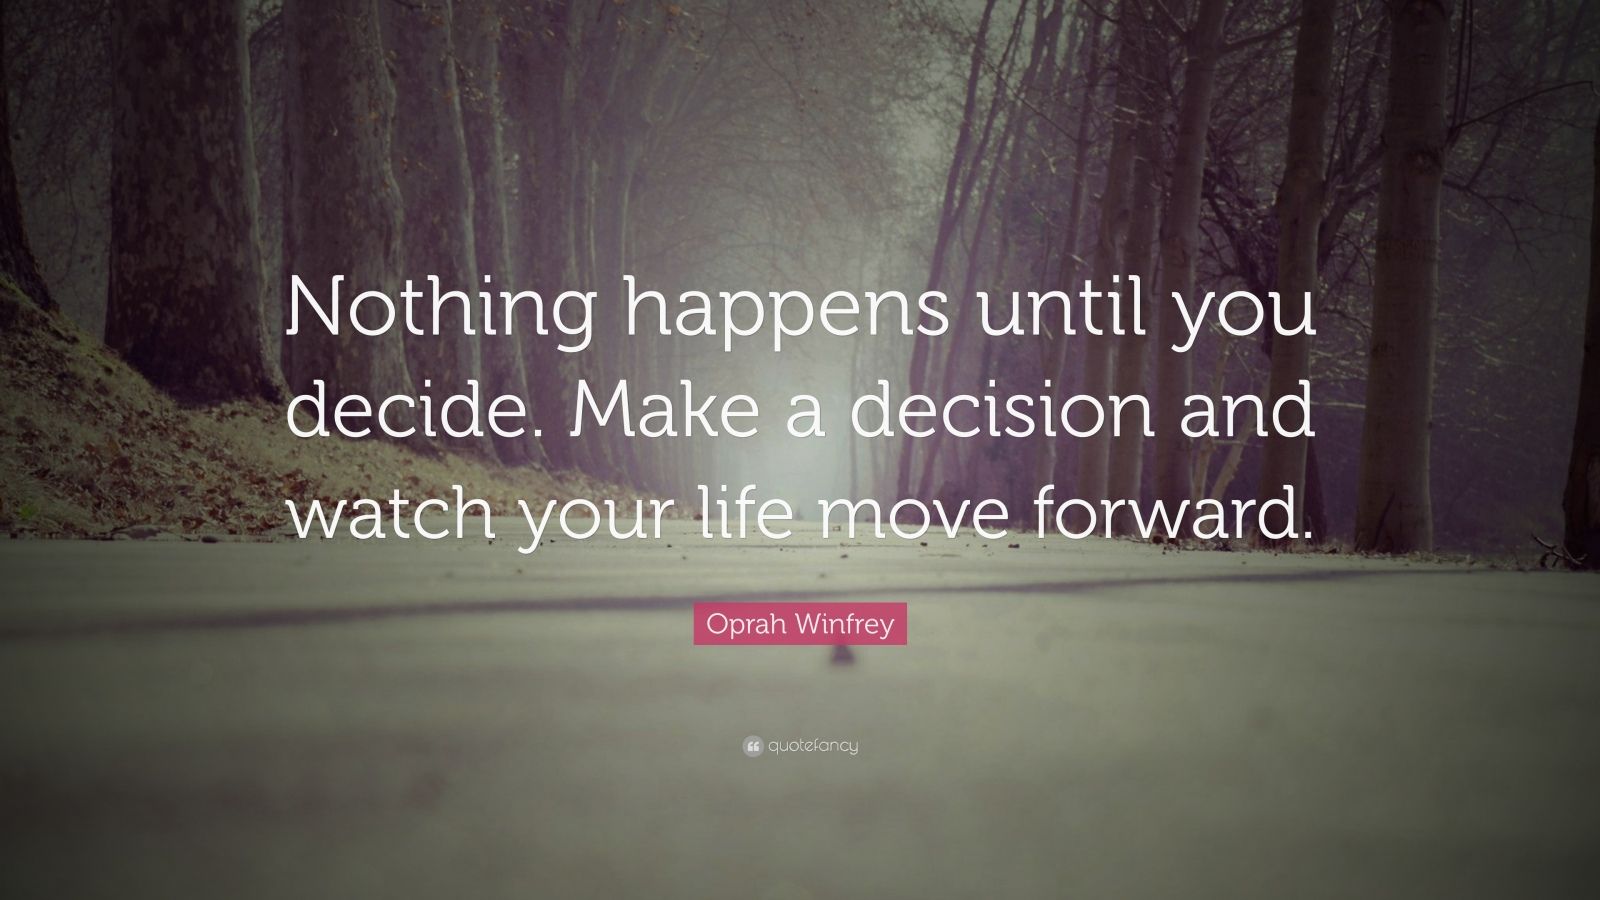 Oprah Winfrey Quote: “Nothing happens until you decide. Make a decision